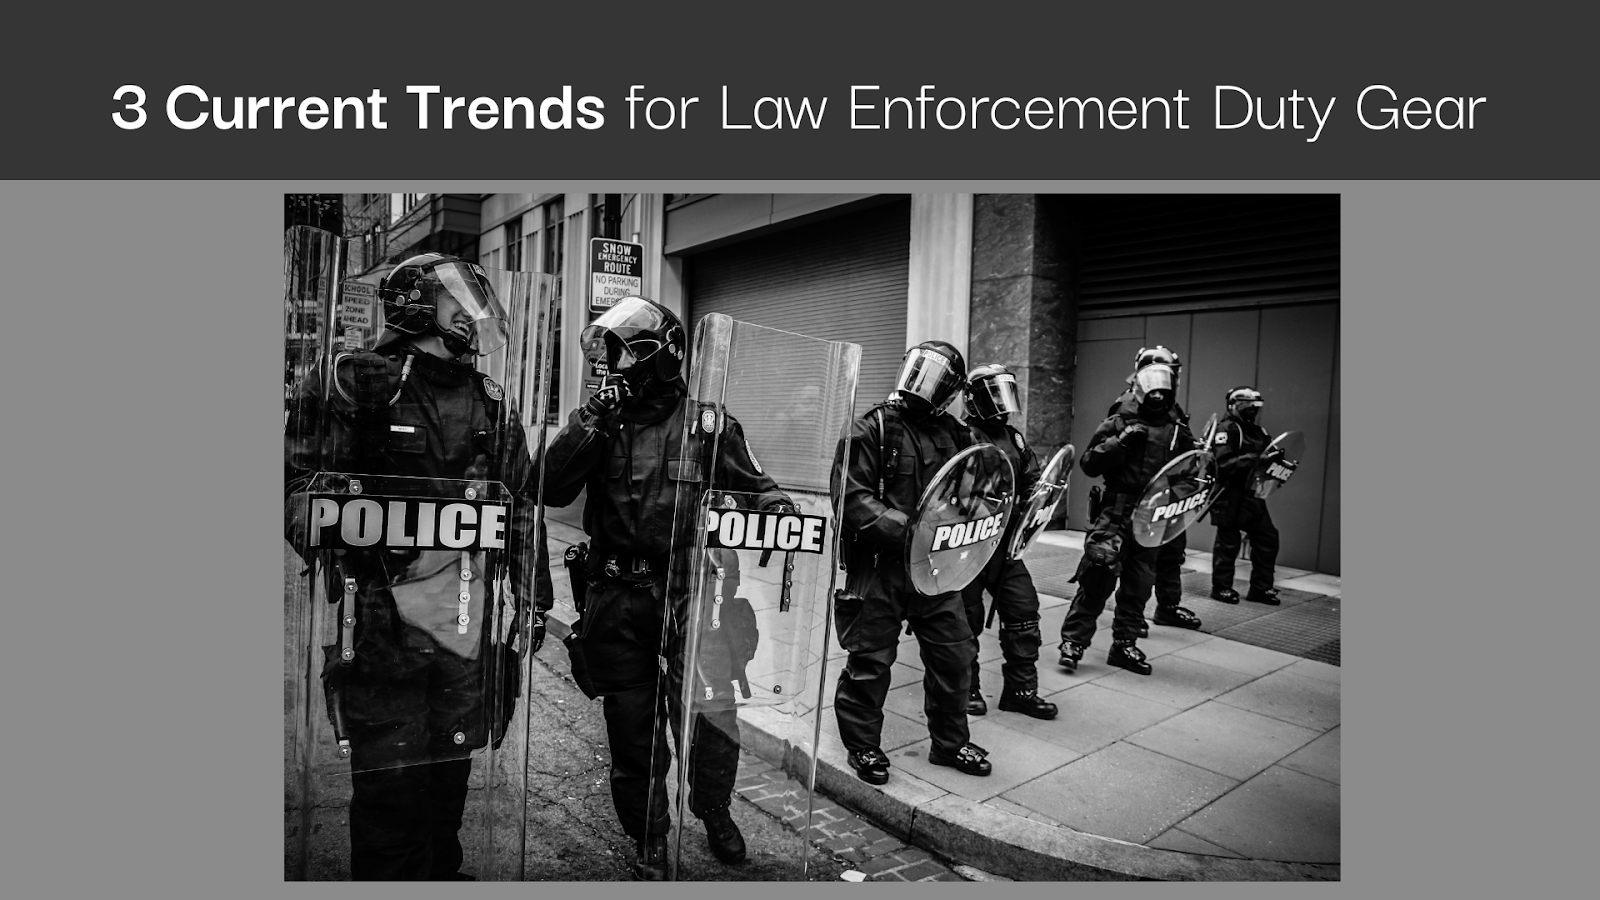 3 Current Trends for Law Enforcement Duty Gear